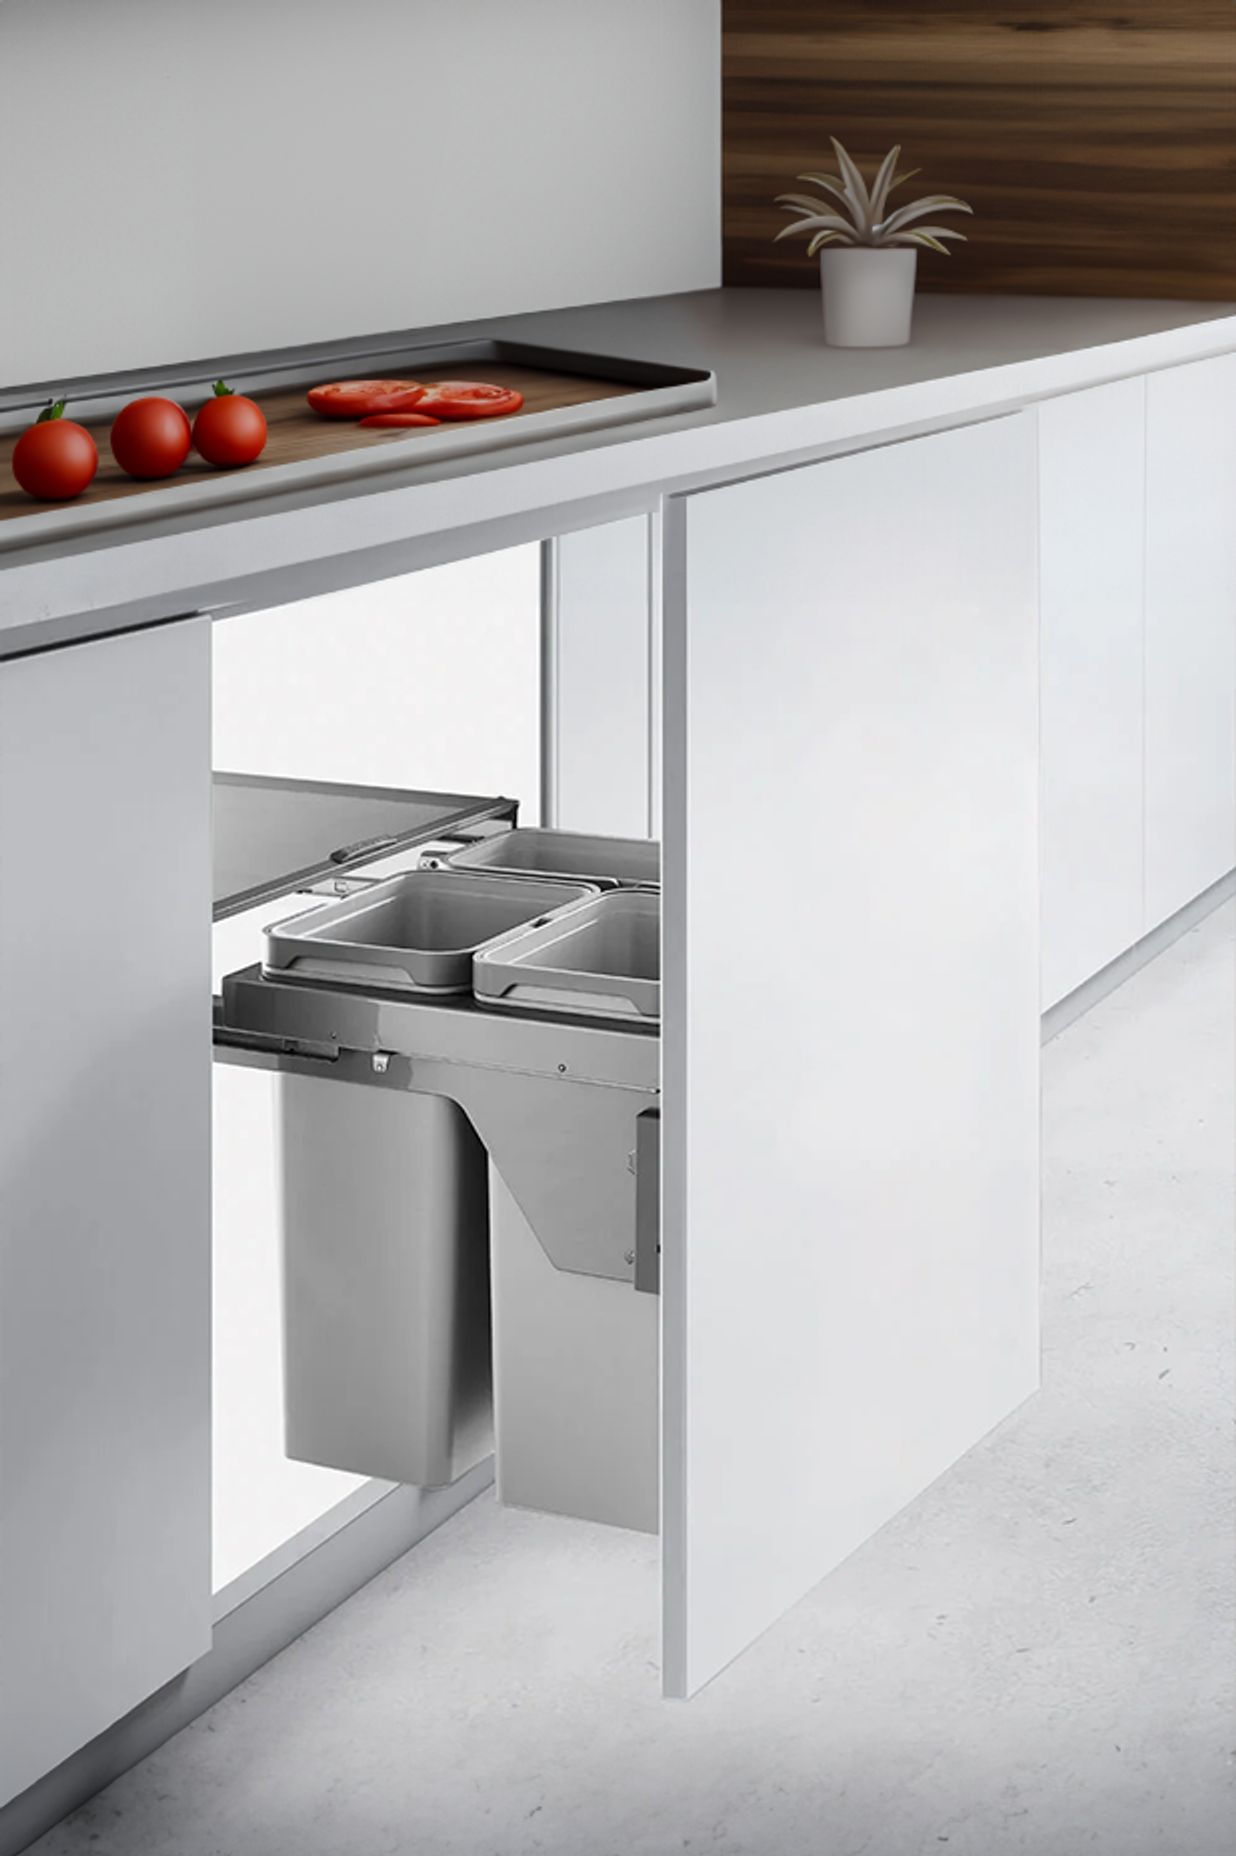 “A lot of the bin designs today really use cupboard space well – many allow you to triple-sort your waste with organics, recycling and general waste with three bins in a pullout system.”